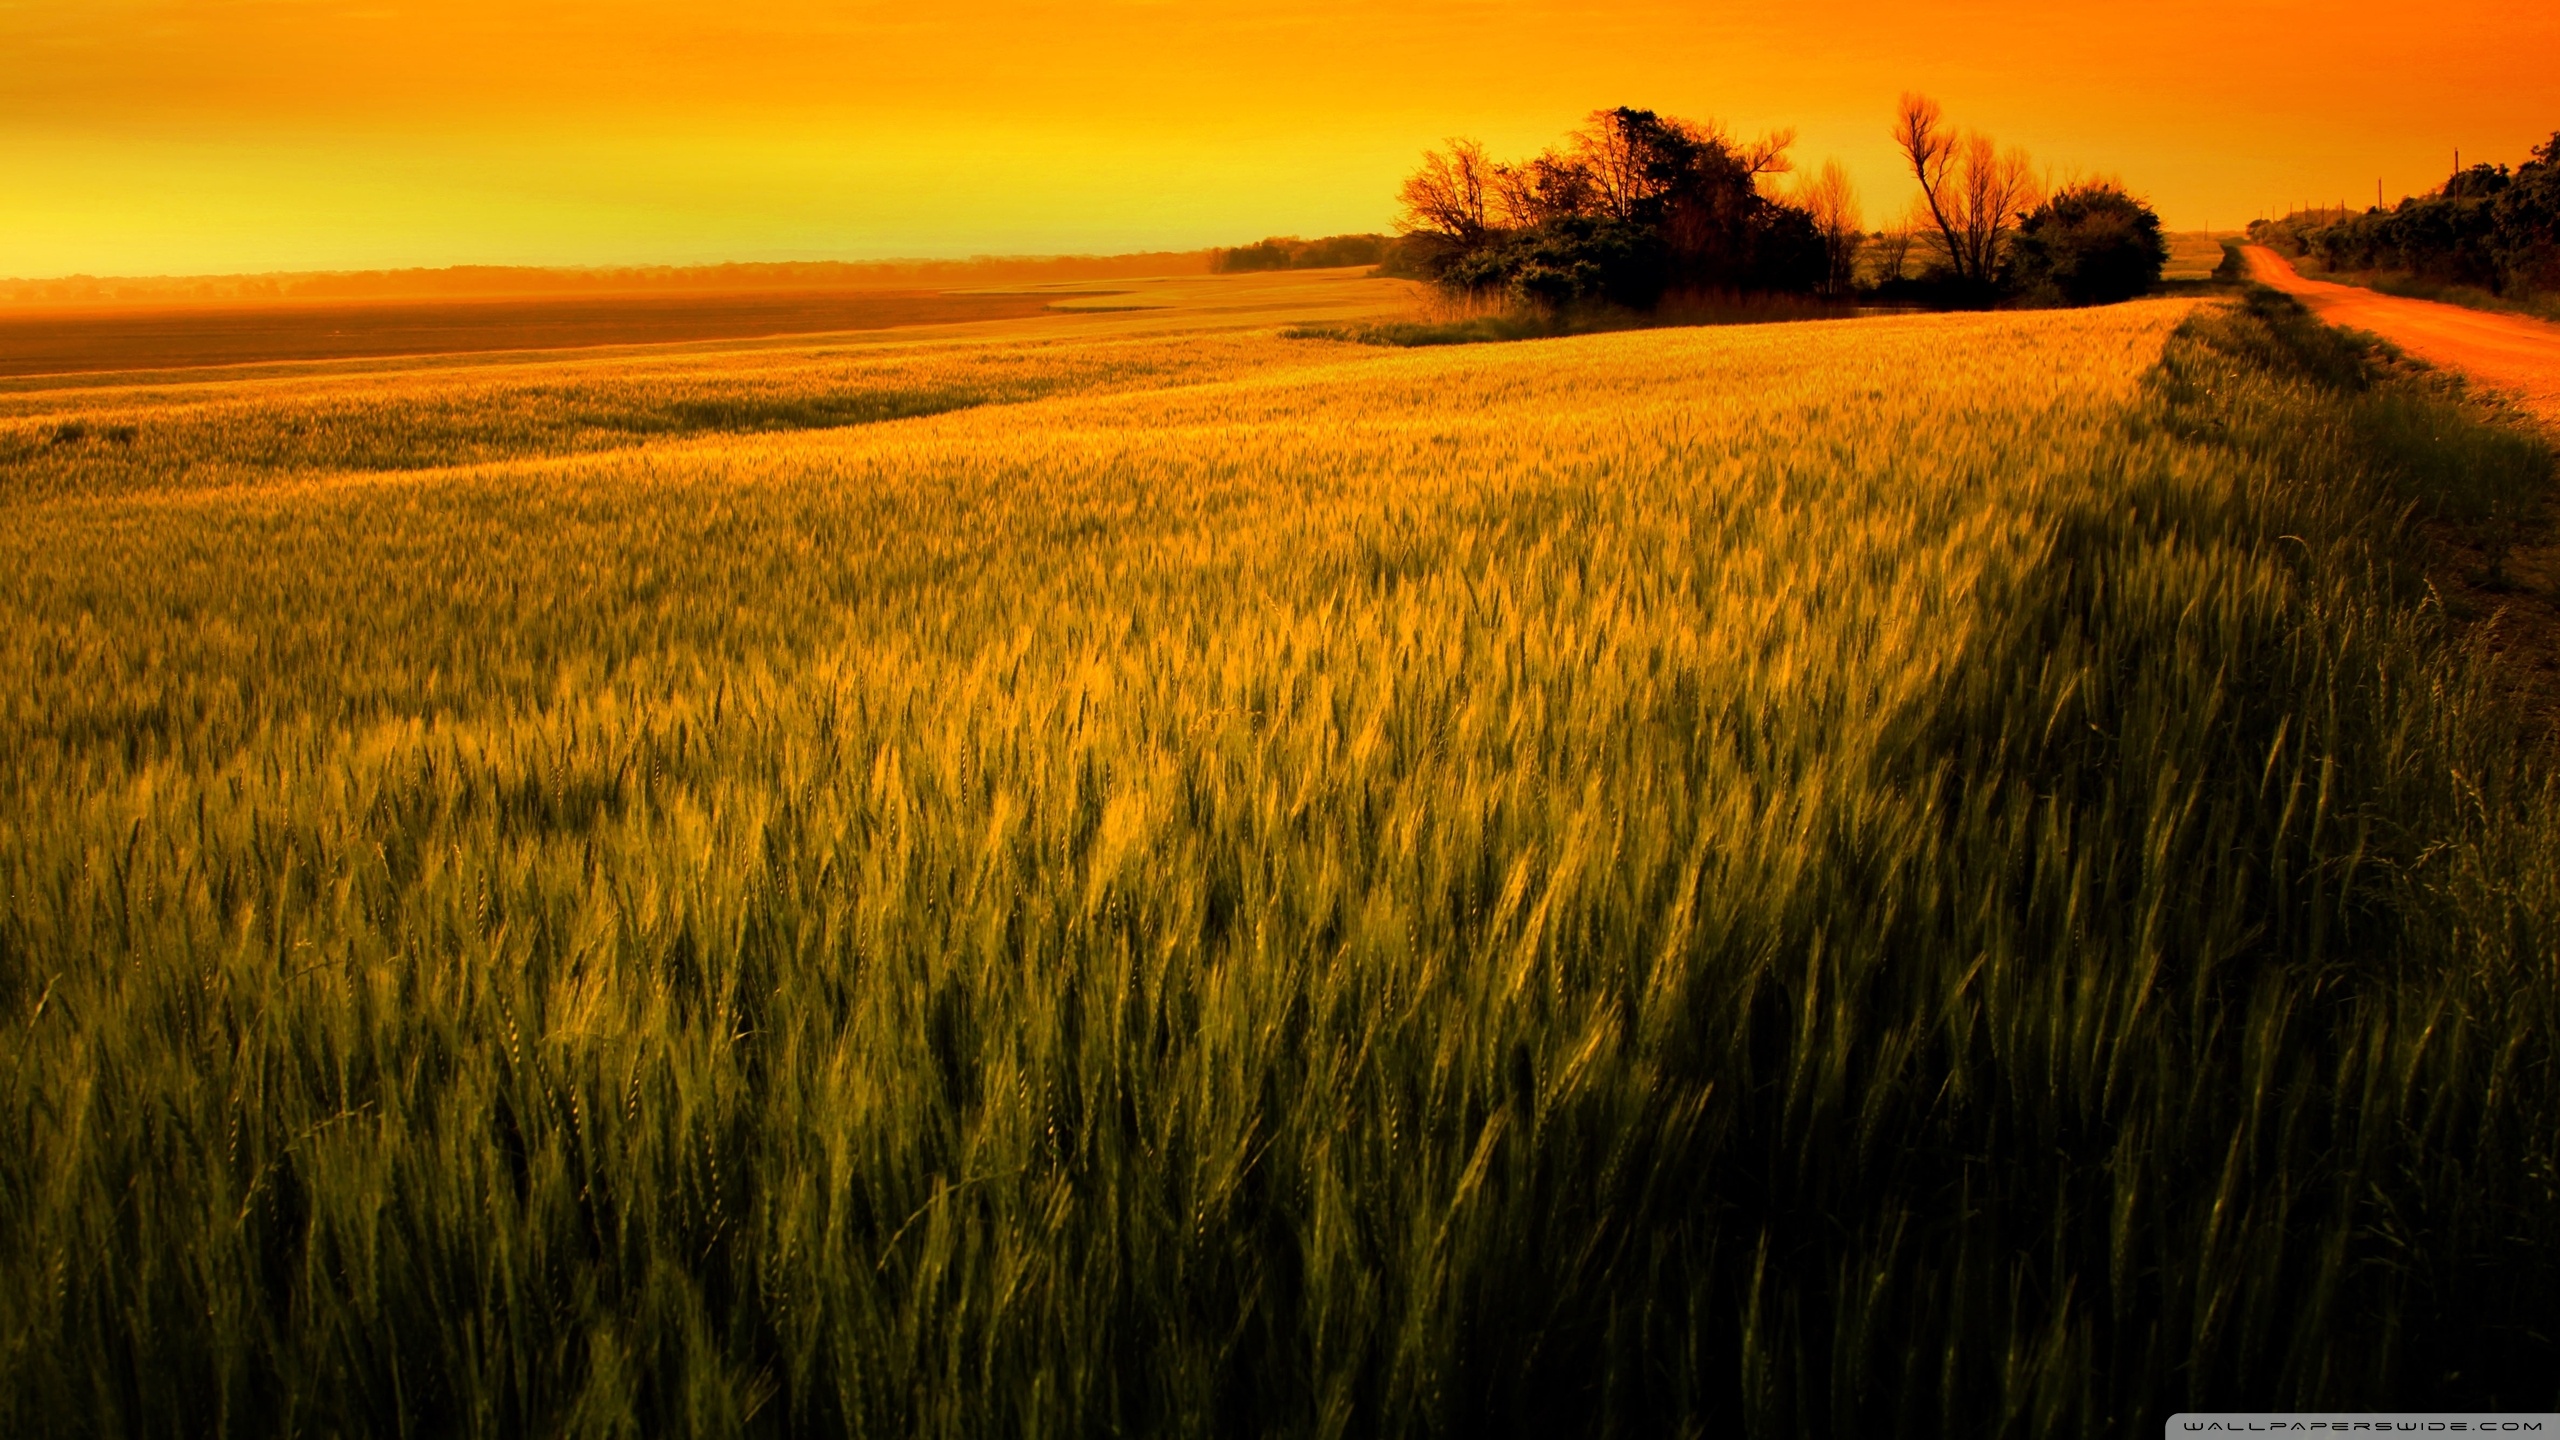 Sunset Over Wheat Field Ultra HD Desktop Background Wallpaper for 4K UHD TV, Multi Display, Dual Monitor, Tablet